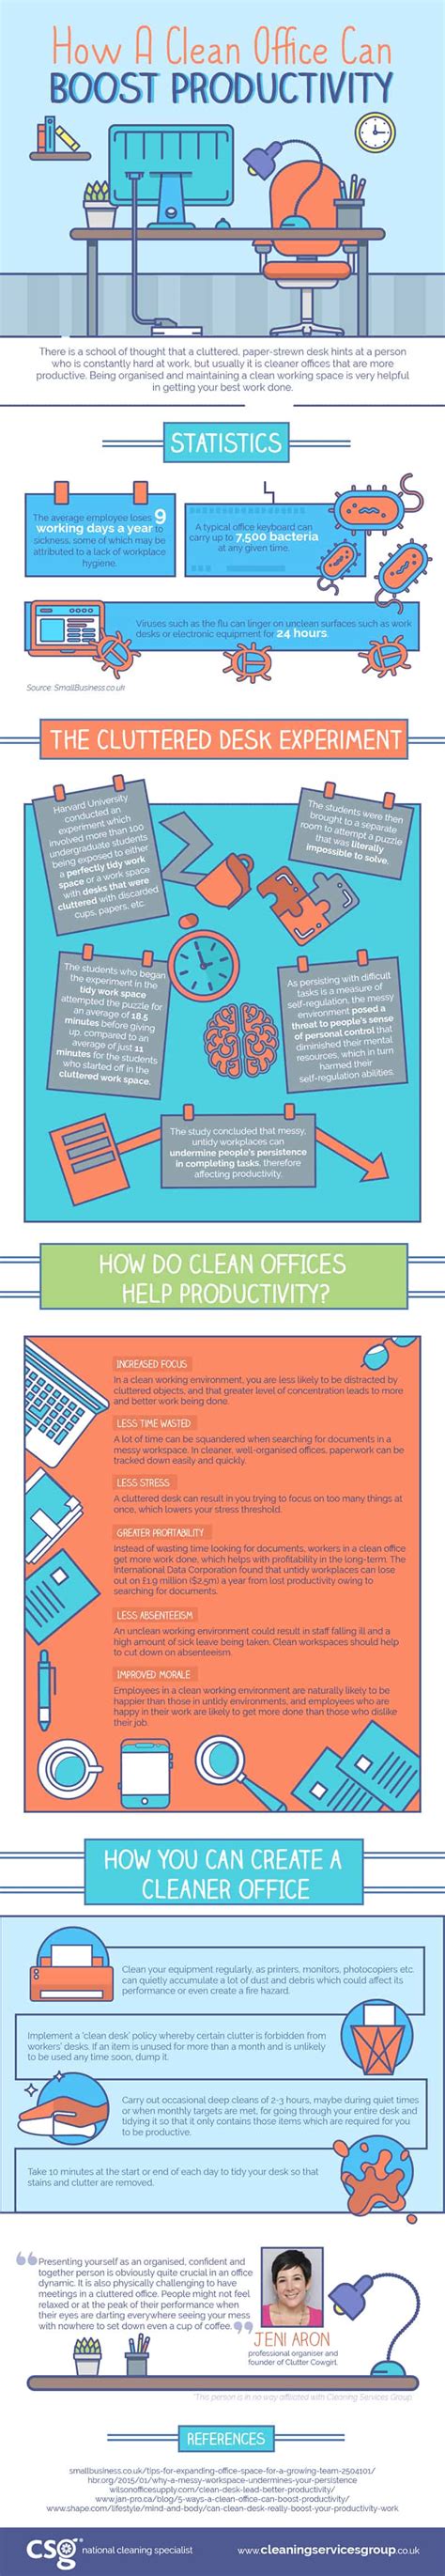 How A Clean Office Can Boost Productivity Infographic Business